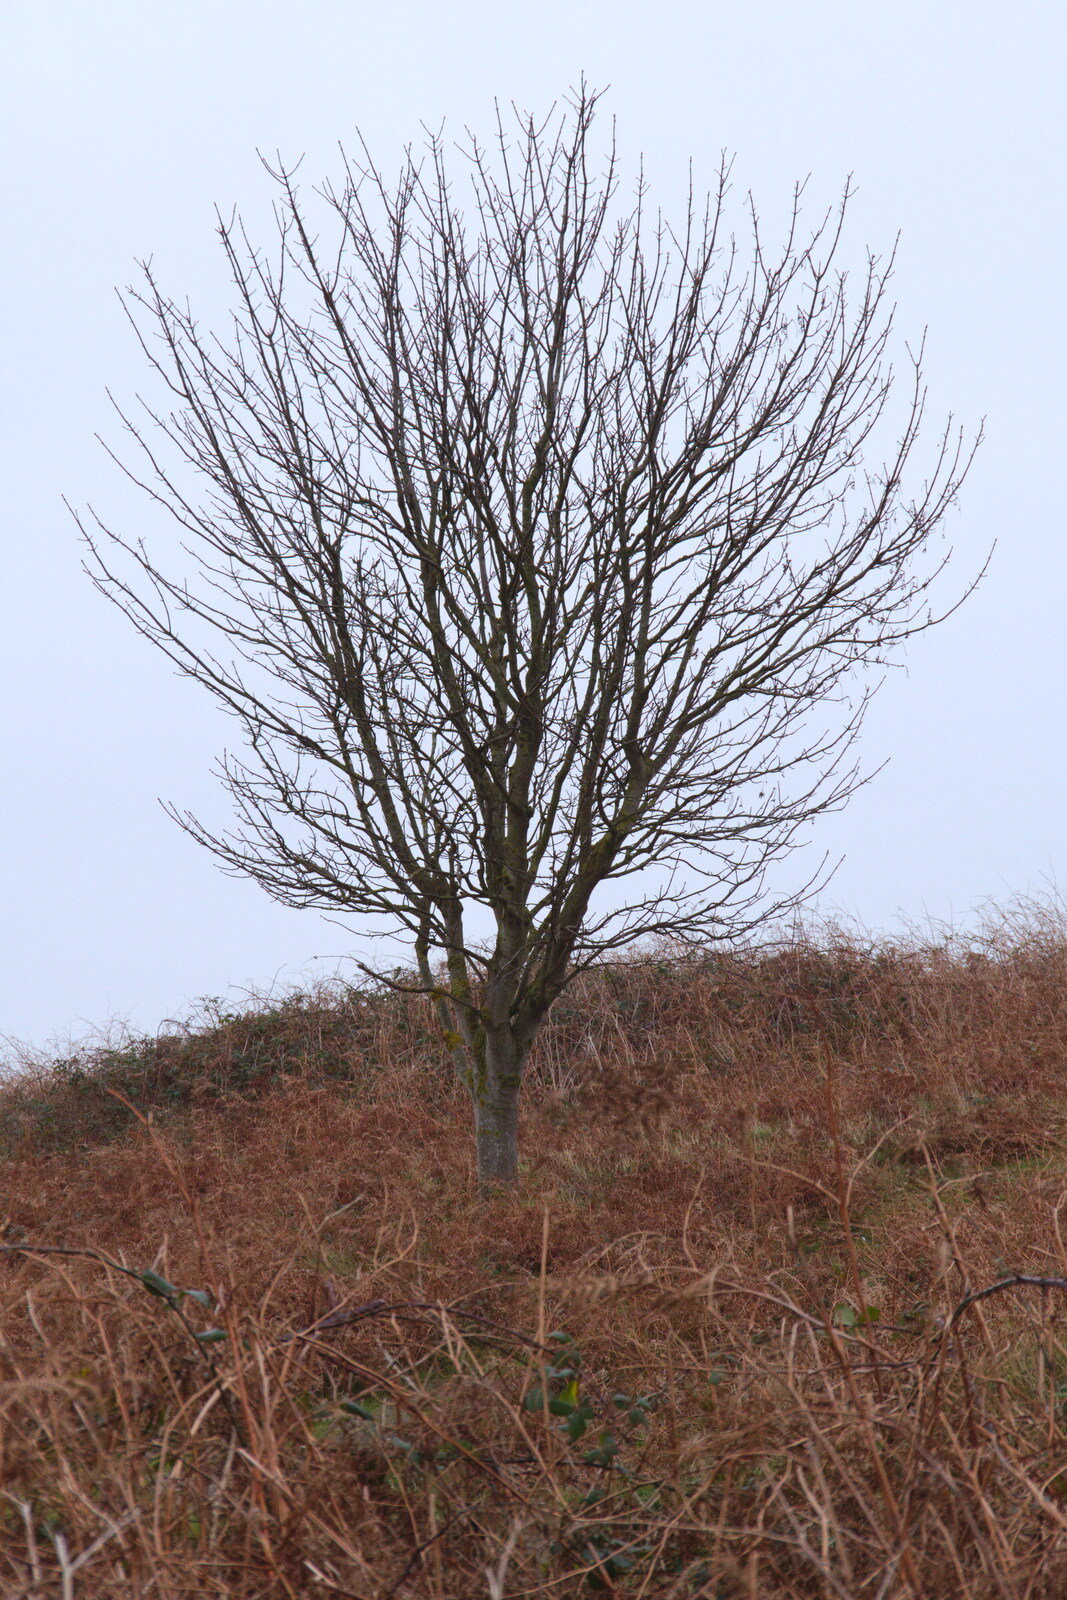 The lonely tree from A Trip to the Beach, Dunwich Heath, Suffolk - 27th December 2019